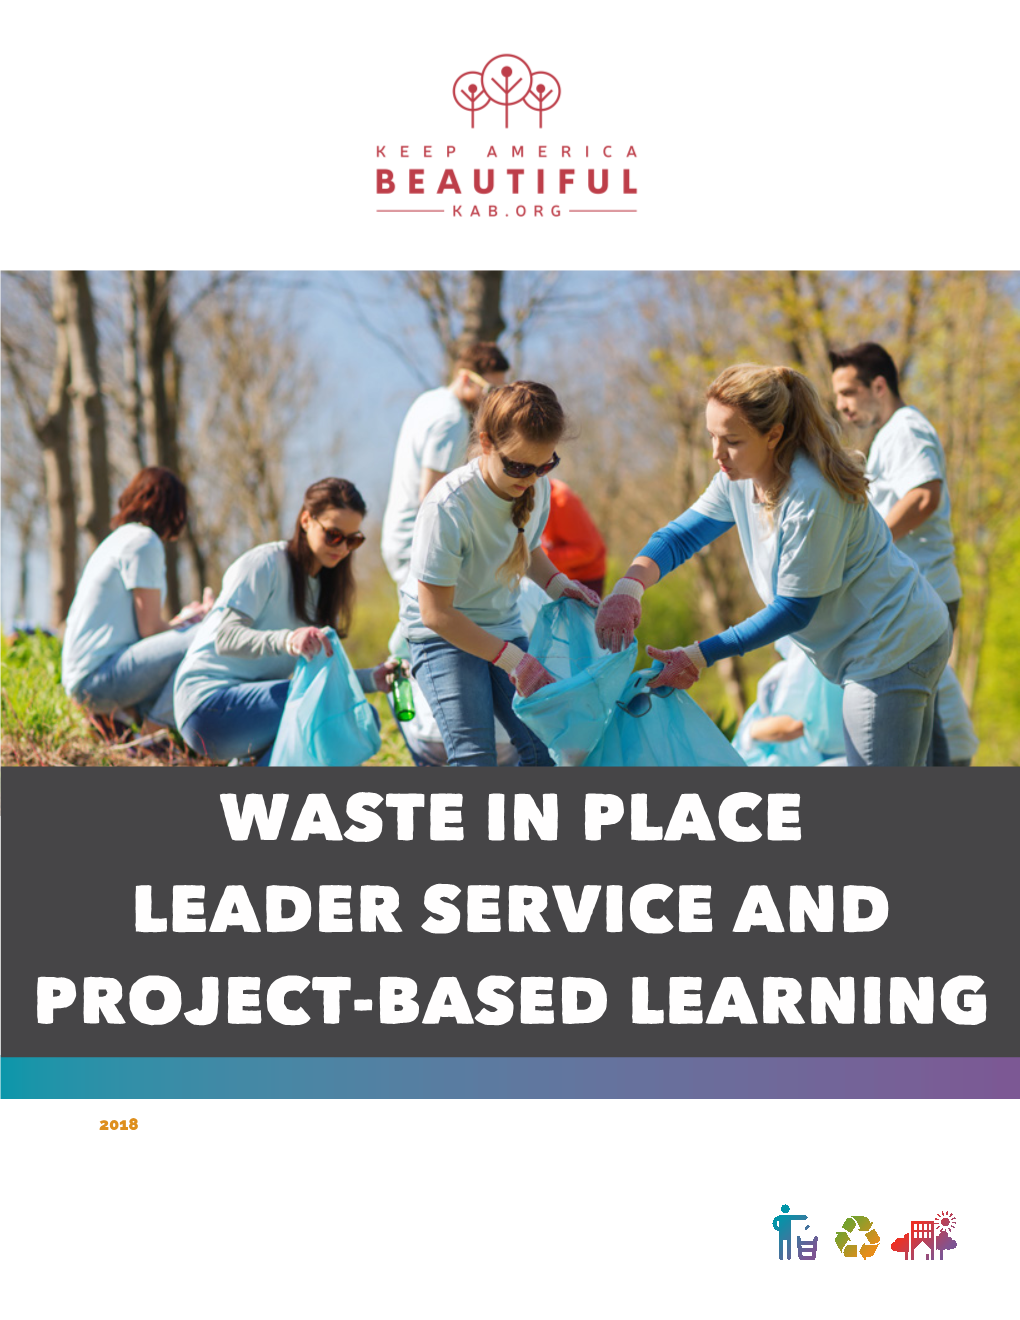 Waste in Place Leader Service and Project-Based Learning